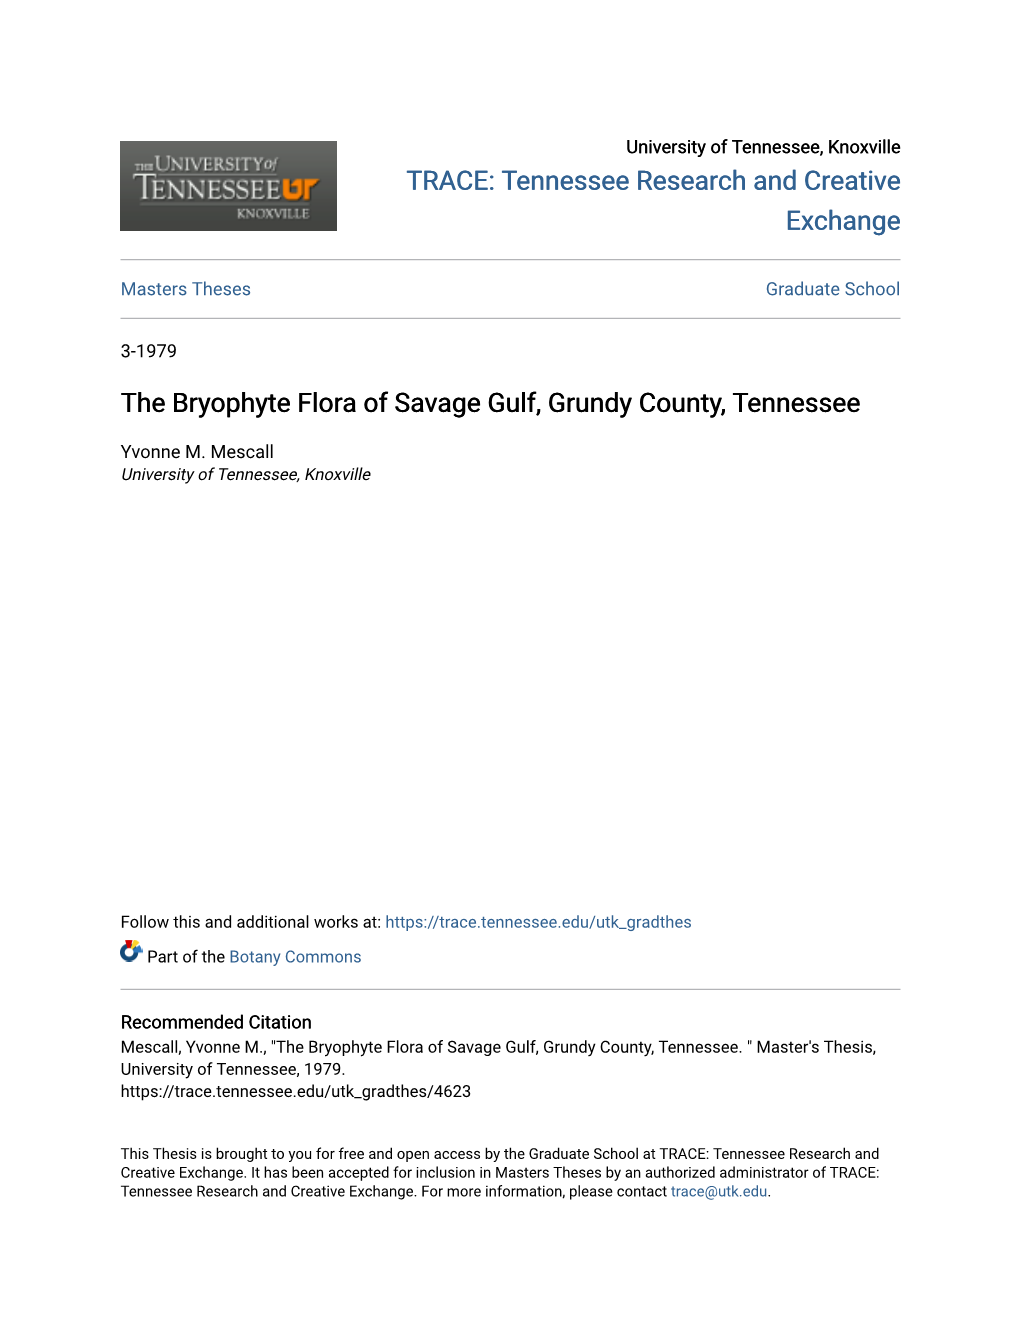 The Bryophyte Flora of Savage Gulf, Grundy County, Tennessee